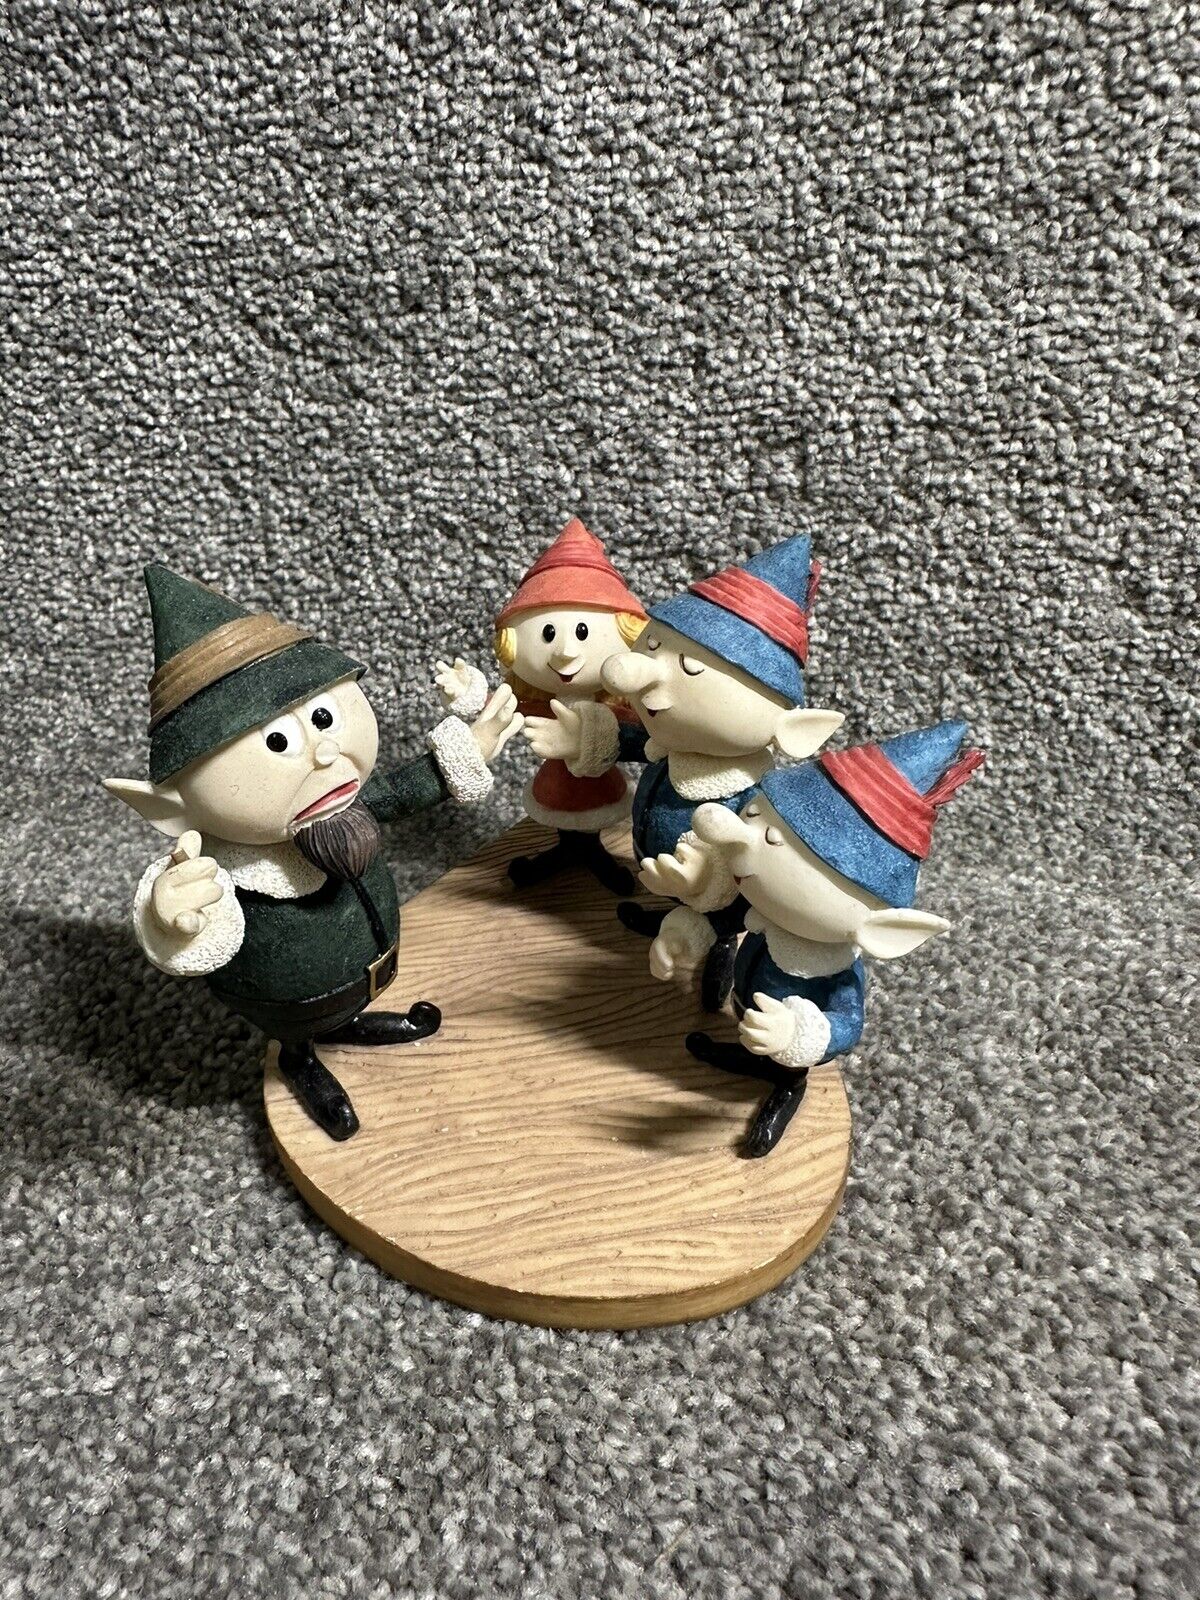 Rudolph And The Island Of Misfit Toys Singing Elves Figurine #875384 Enesco